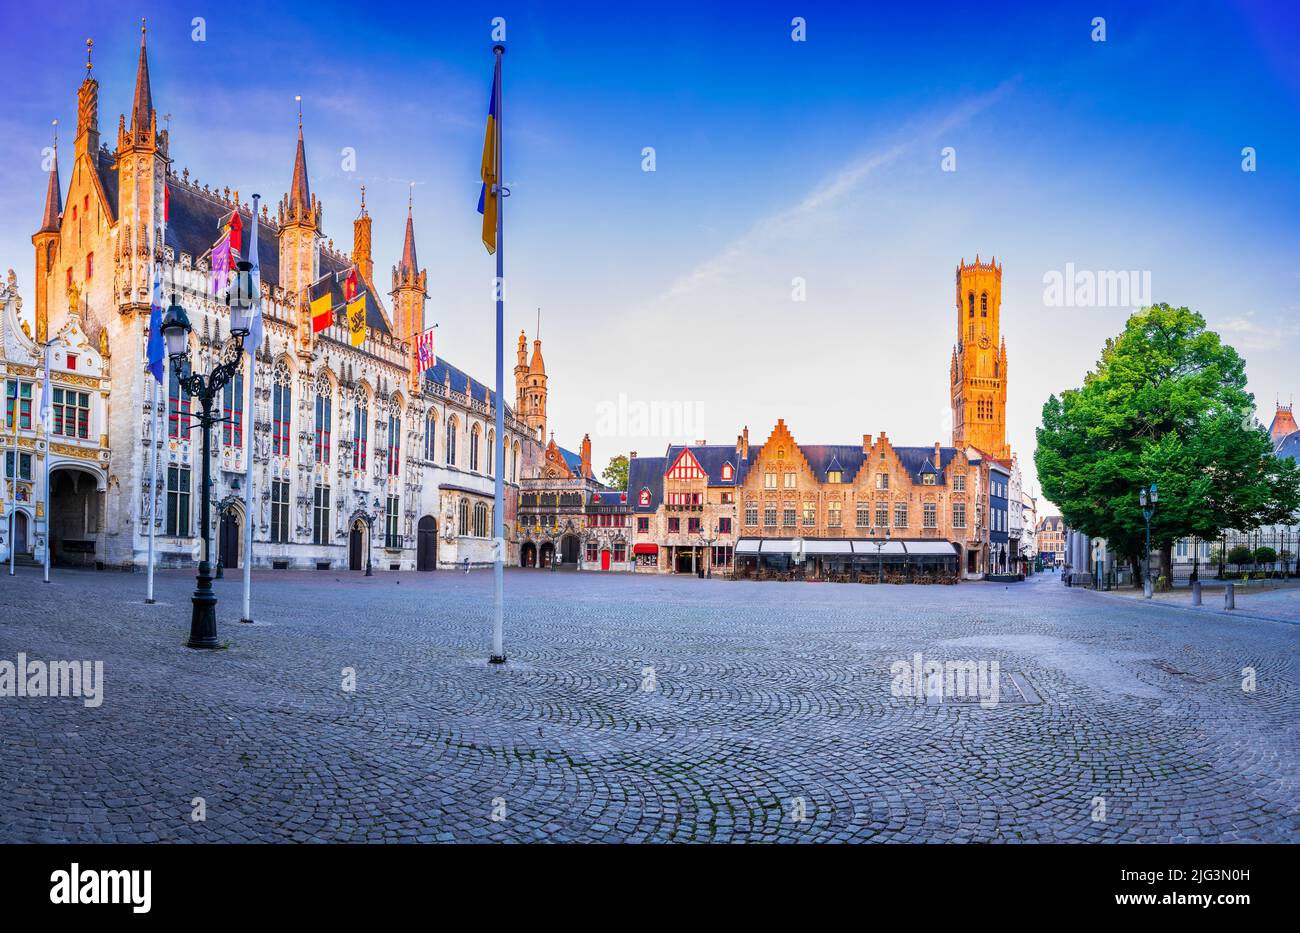 Bruges, Belgium. Panoramic Burg Square with famous Belfry tower and medieval buildings, Flanders sight. Stock Photo